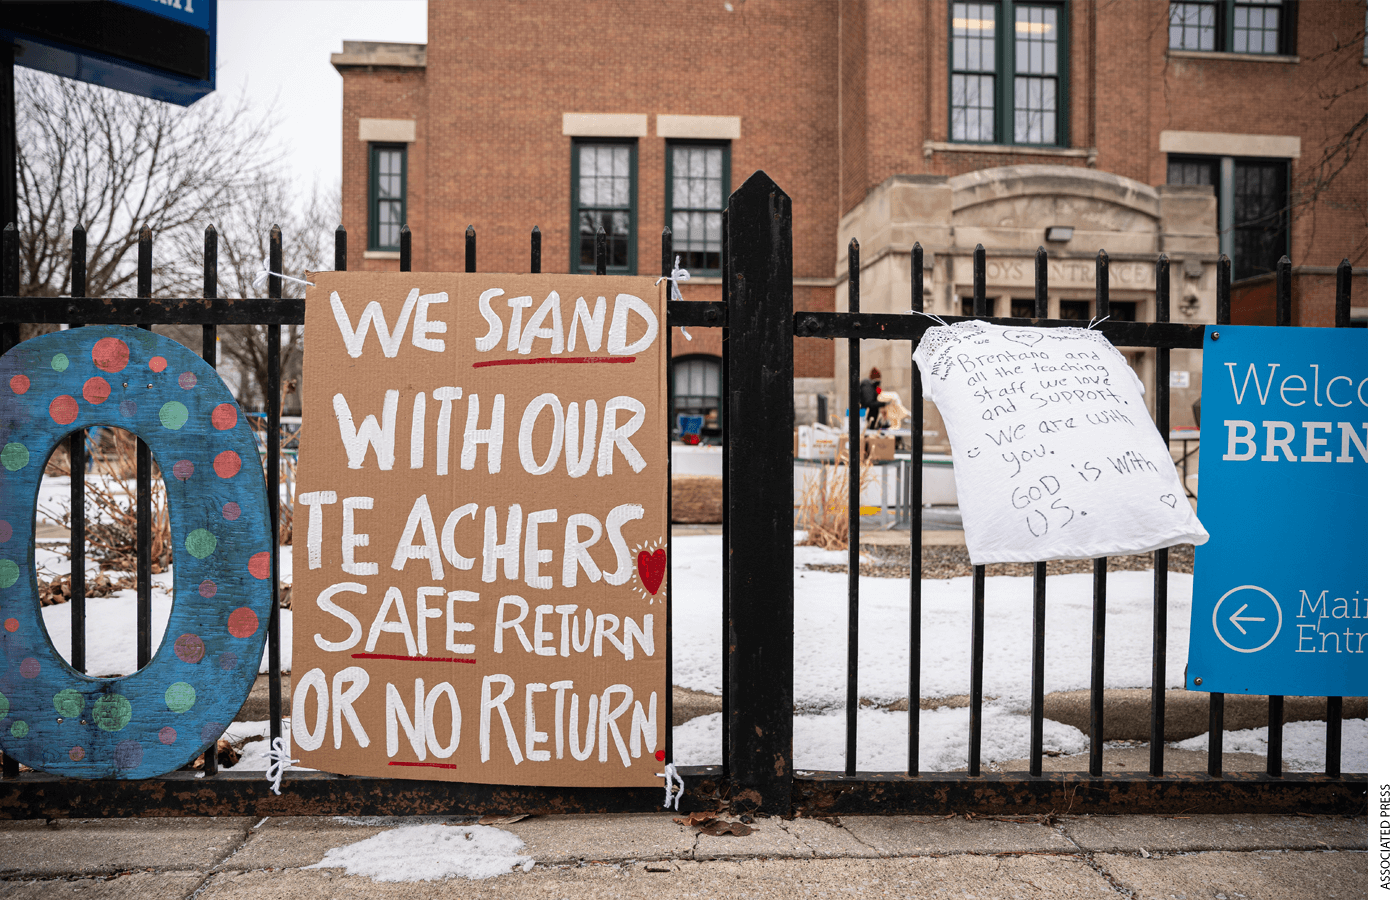 Banners in support of the elementary school teachers hang outside Brentano Elementary School as teachers instruct virtual classes during a protest against returning to in-person teaching outside of Brentano Elementary School in Chicago, Monday, Jan. 4, 2021.